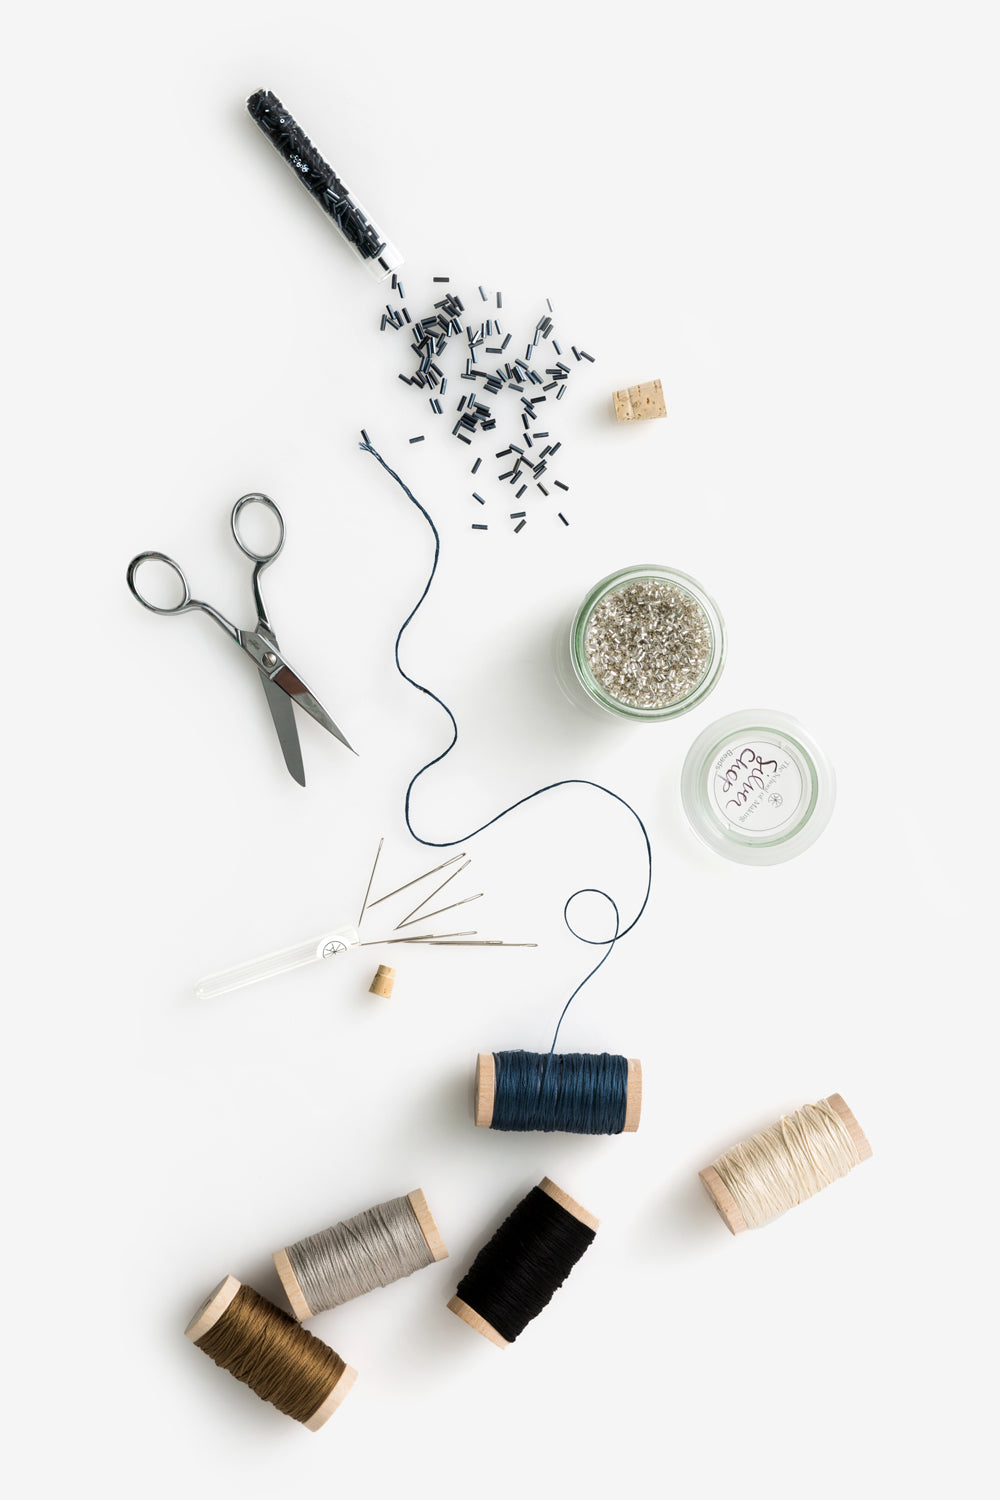 The School of Making Classic Embroidery Scissors Supplies for Hand-Sewing Projects.